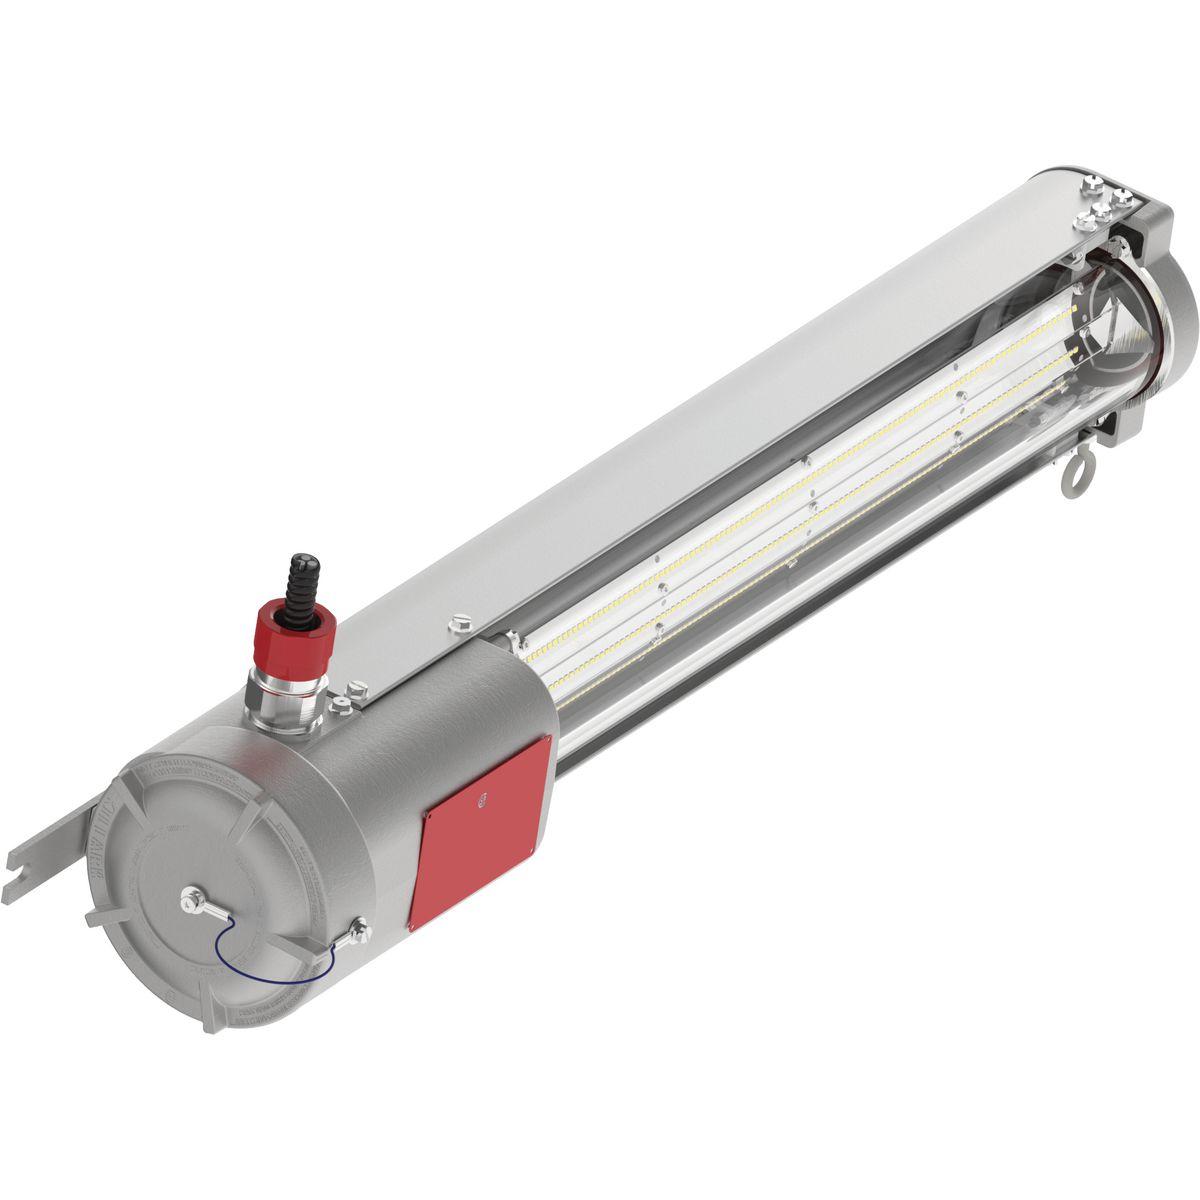 Hubbell L1L1430D-3590 L1L Series 14,000 Lumen Output 3500K CCT & 90 CRI, 120-277 Universal Voltage With Diffuse Glass Optic  ; Tool-less access to wiring chamber ; Slot-back design allows for a 5/16 or M8 bolt to be mounted anywhere along the back of the luminaire ; Standard s